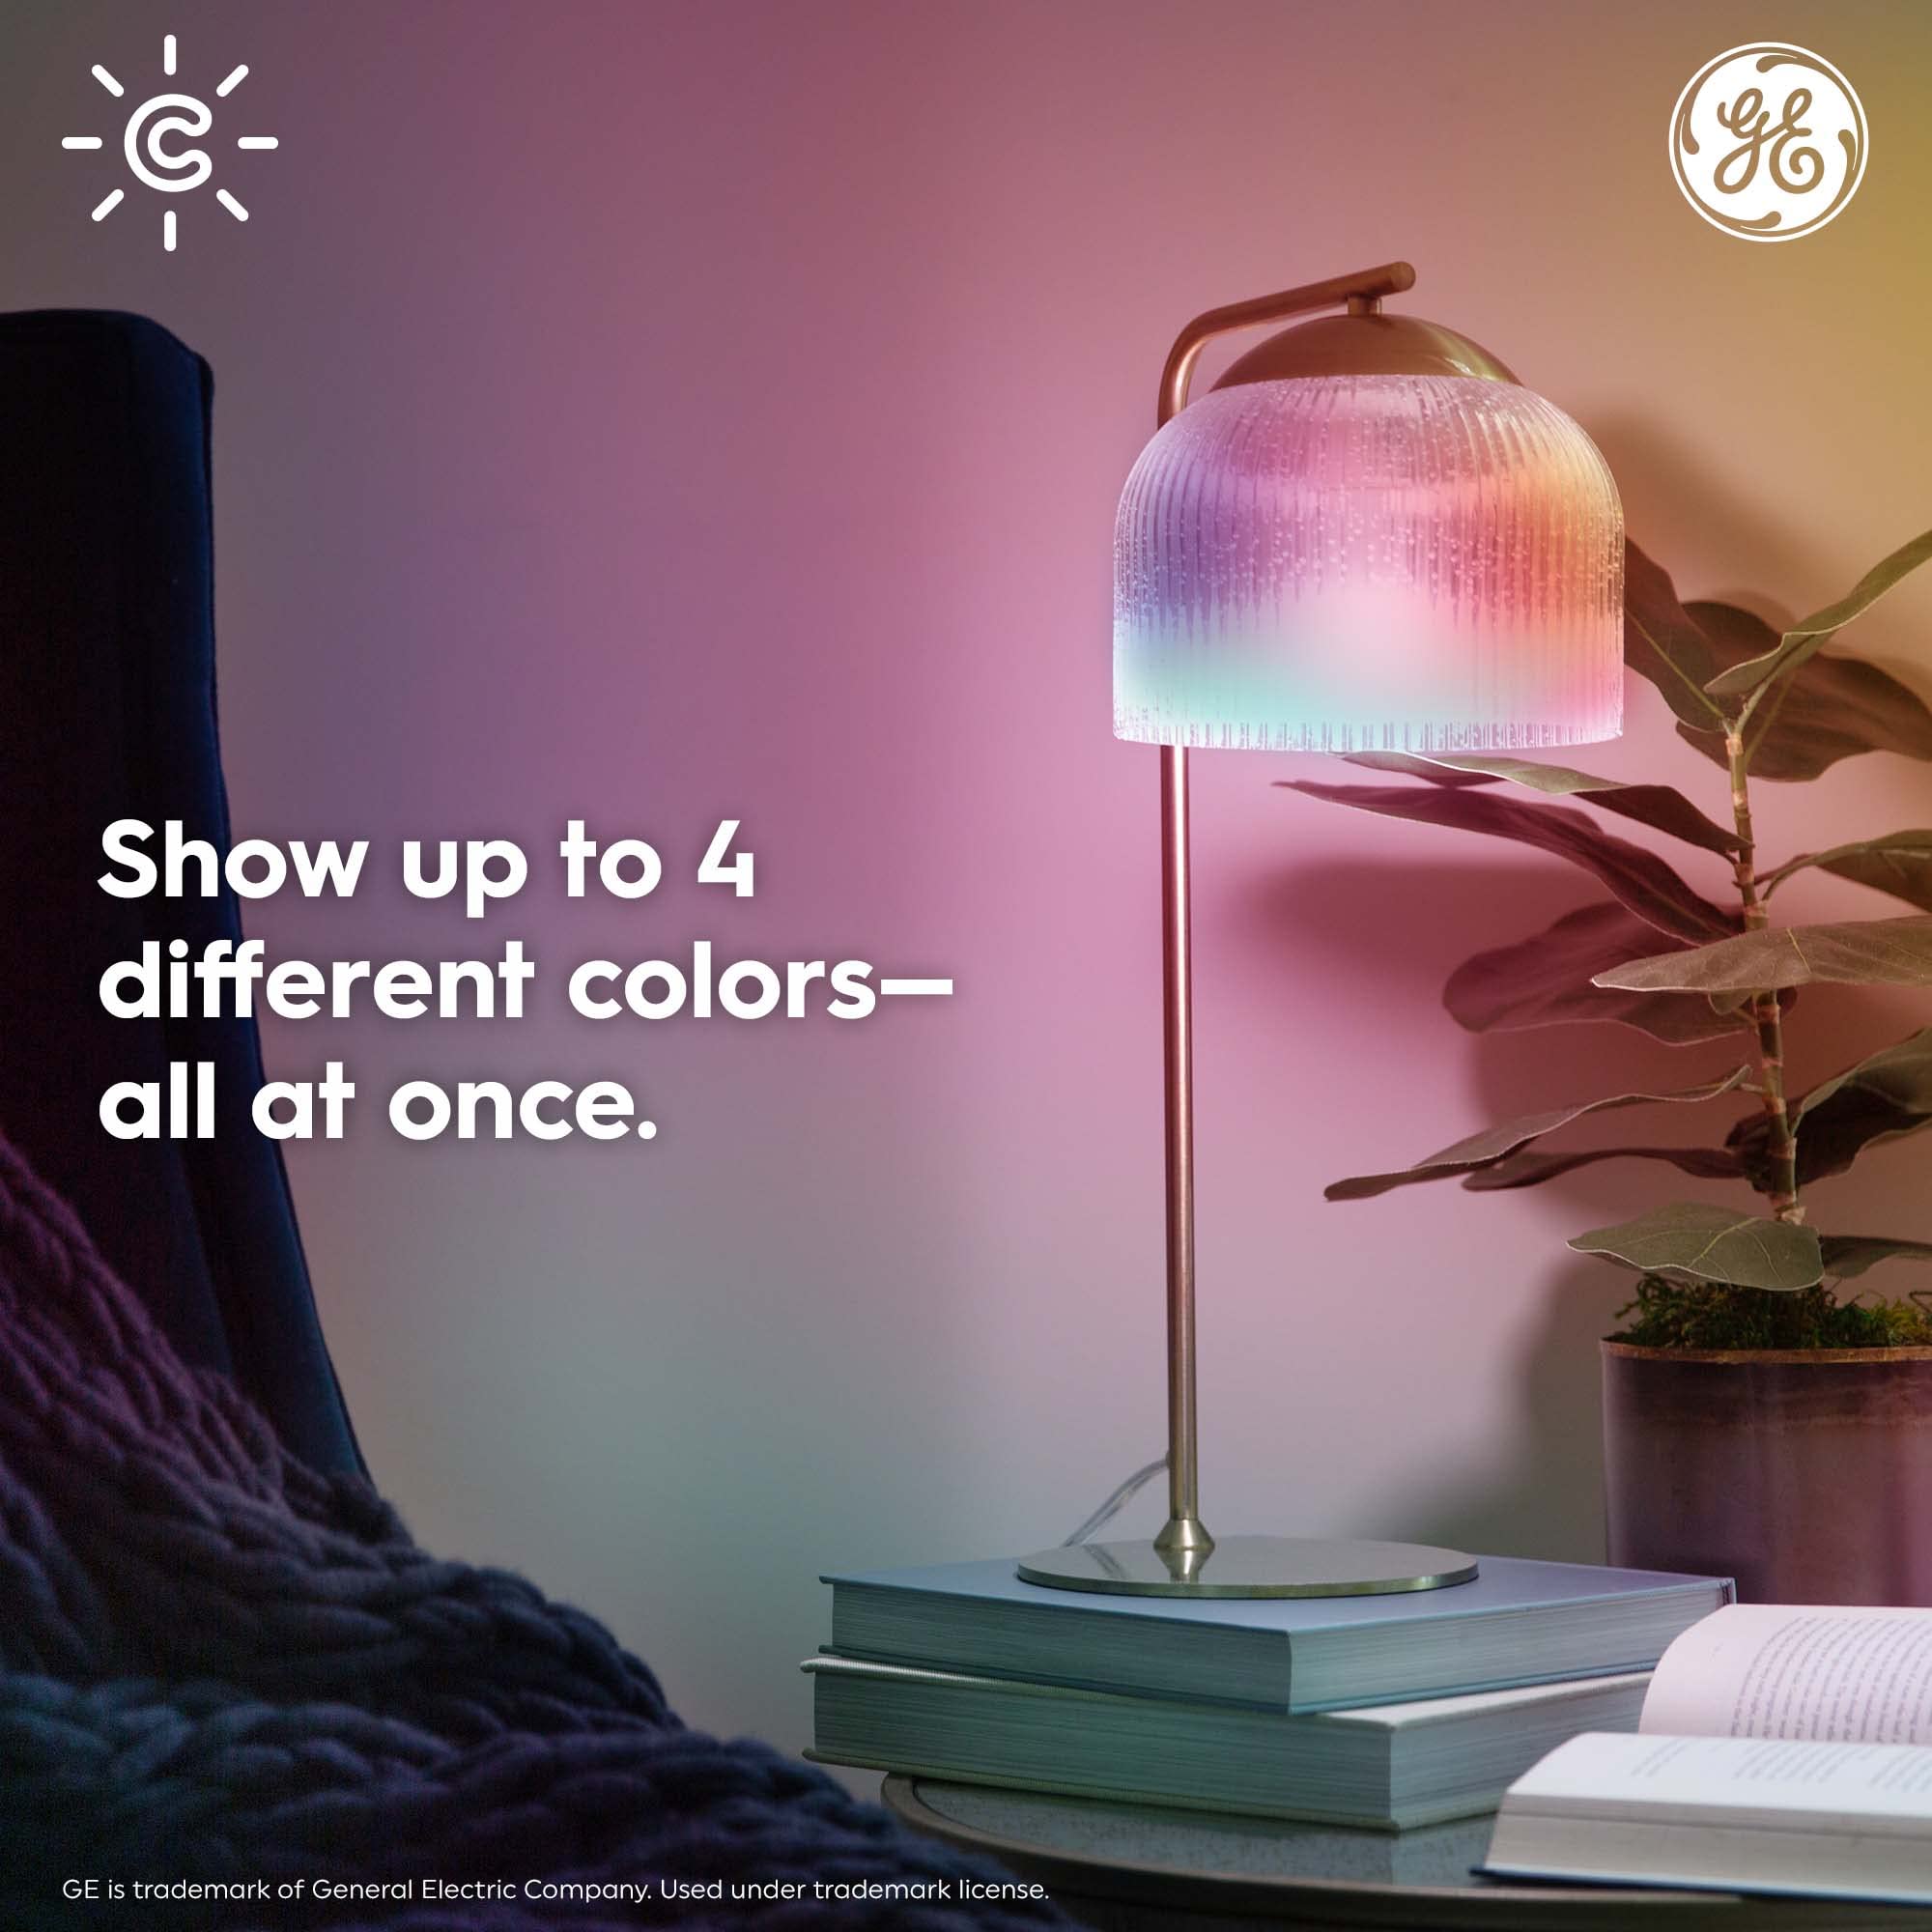 GE Lighting CYNC Dynamic Effects Smart LED Light Bulb, Color Changing, Bluetooth and Wi-Fi, Works with Alexa and Google Home, BR30 Indoor Floodlight Bulb